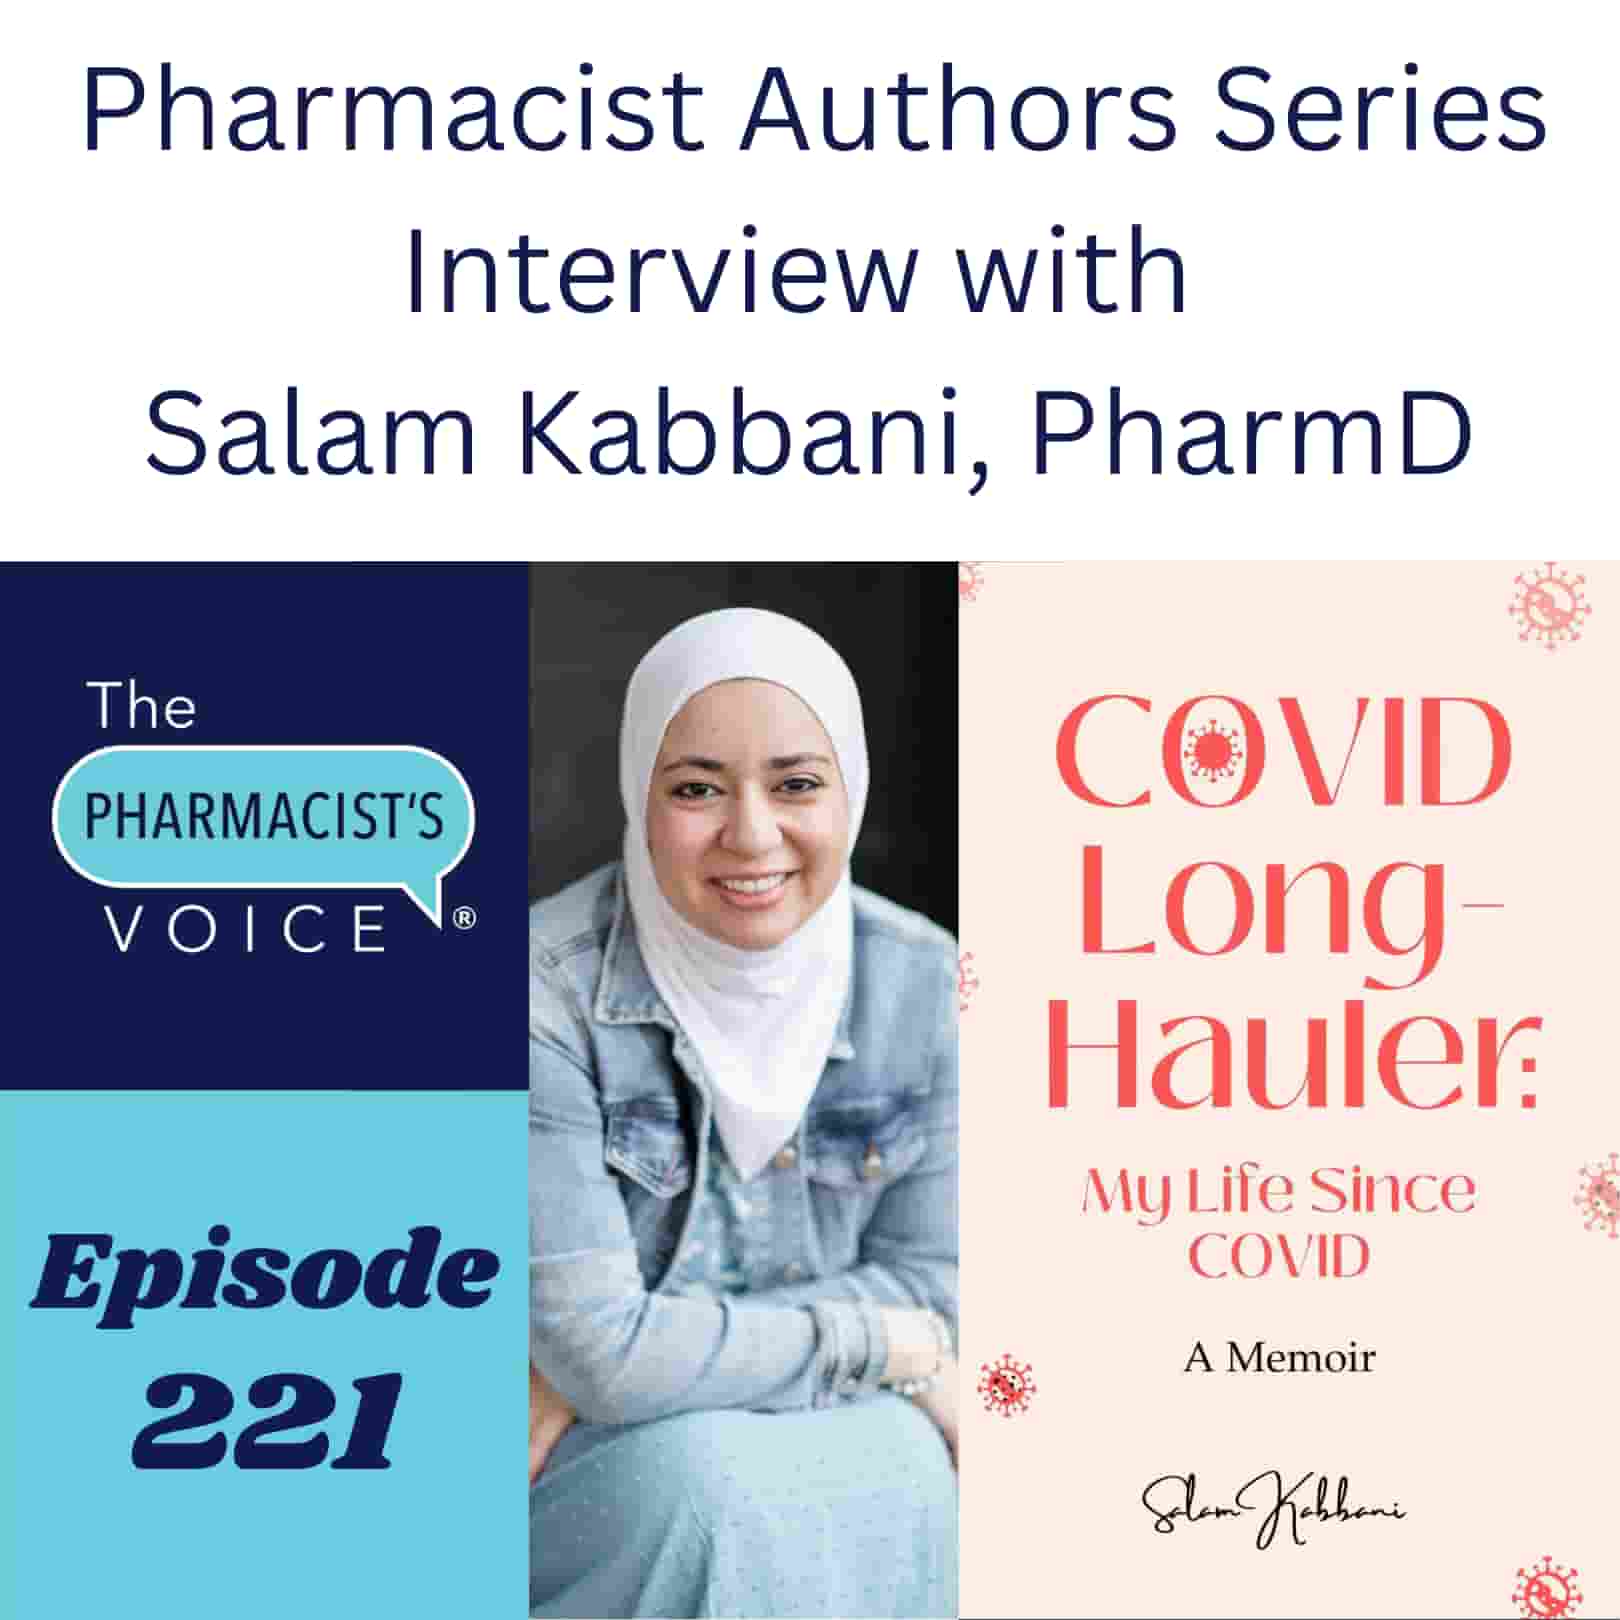 Pharmacist Authors Series. Interview with Salam Kabbani, PharmD This is episode artwork for a podcast. The podcast is The Pharmacist's Voice. This is episode 221. Salam Kabbani is the guest. She wrote a book named COVID Long-Hauler: My Life Since COVID. Salam is pictured in the artwork. Salam has fair skin and no glasses. She is smiling straight at the camera. She wears a white head scarf, a blue dress, and a jean jacket. To learn more about the podcast, visit https://www.thepharmacistsvoice.com